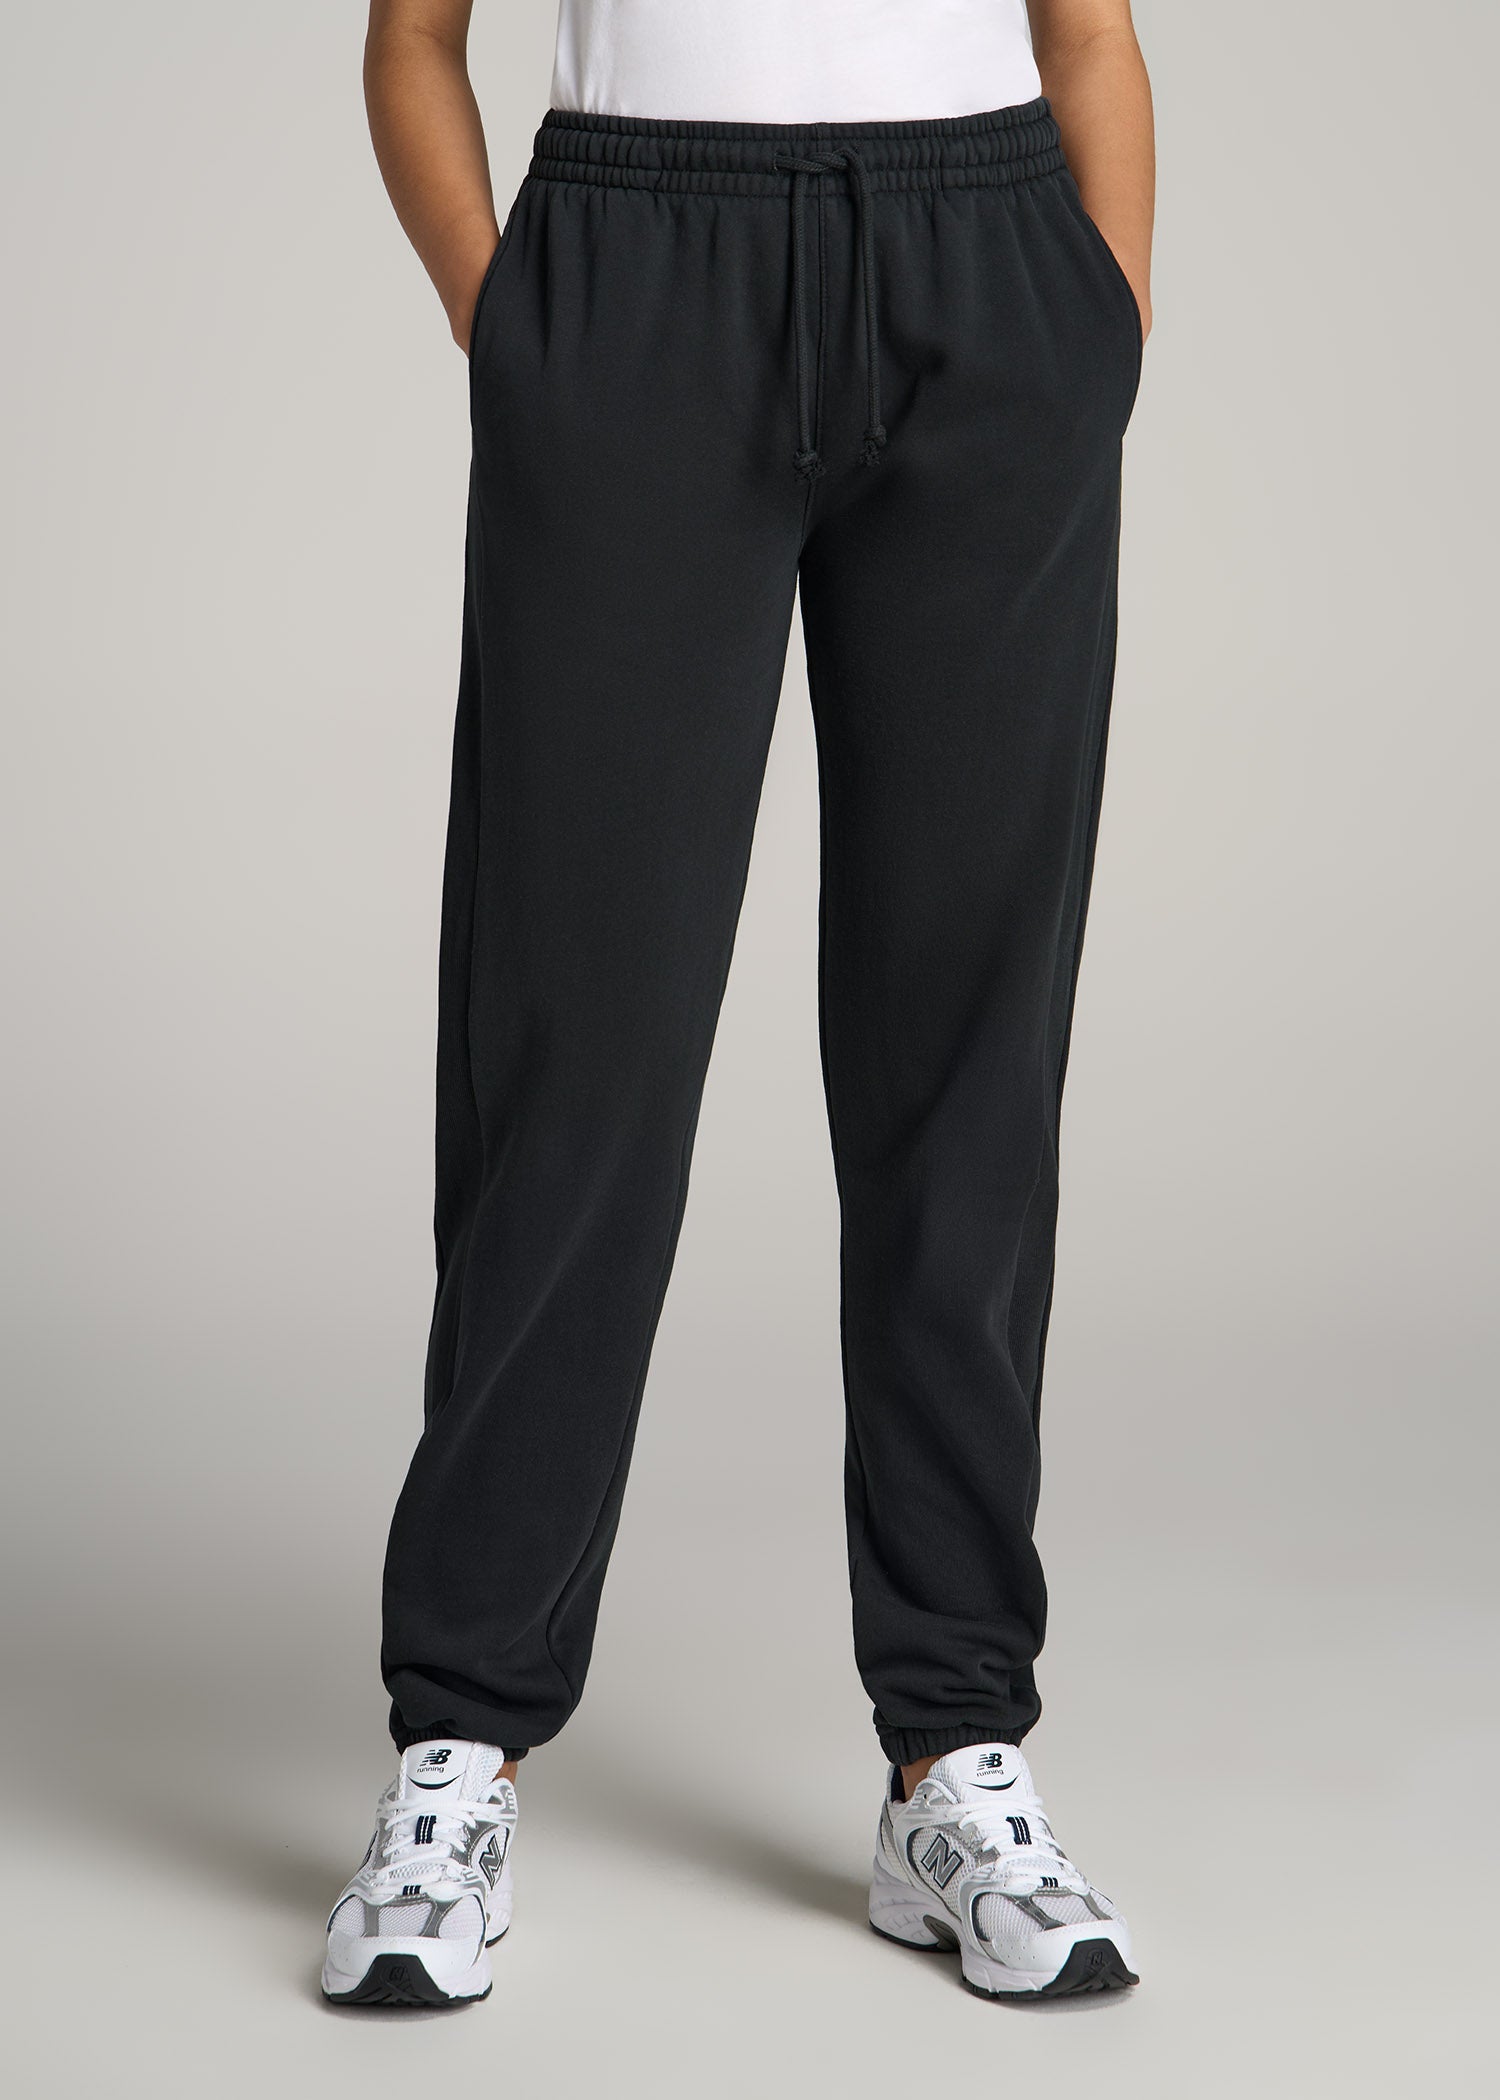 Ladies Leisure Sports Loose Bunched Pants Sweatpants Joggers Women